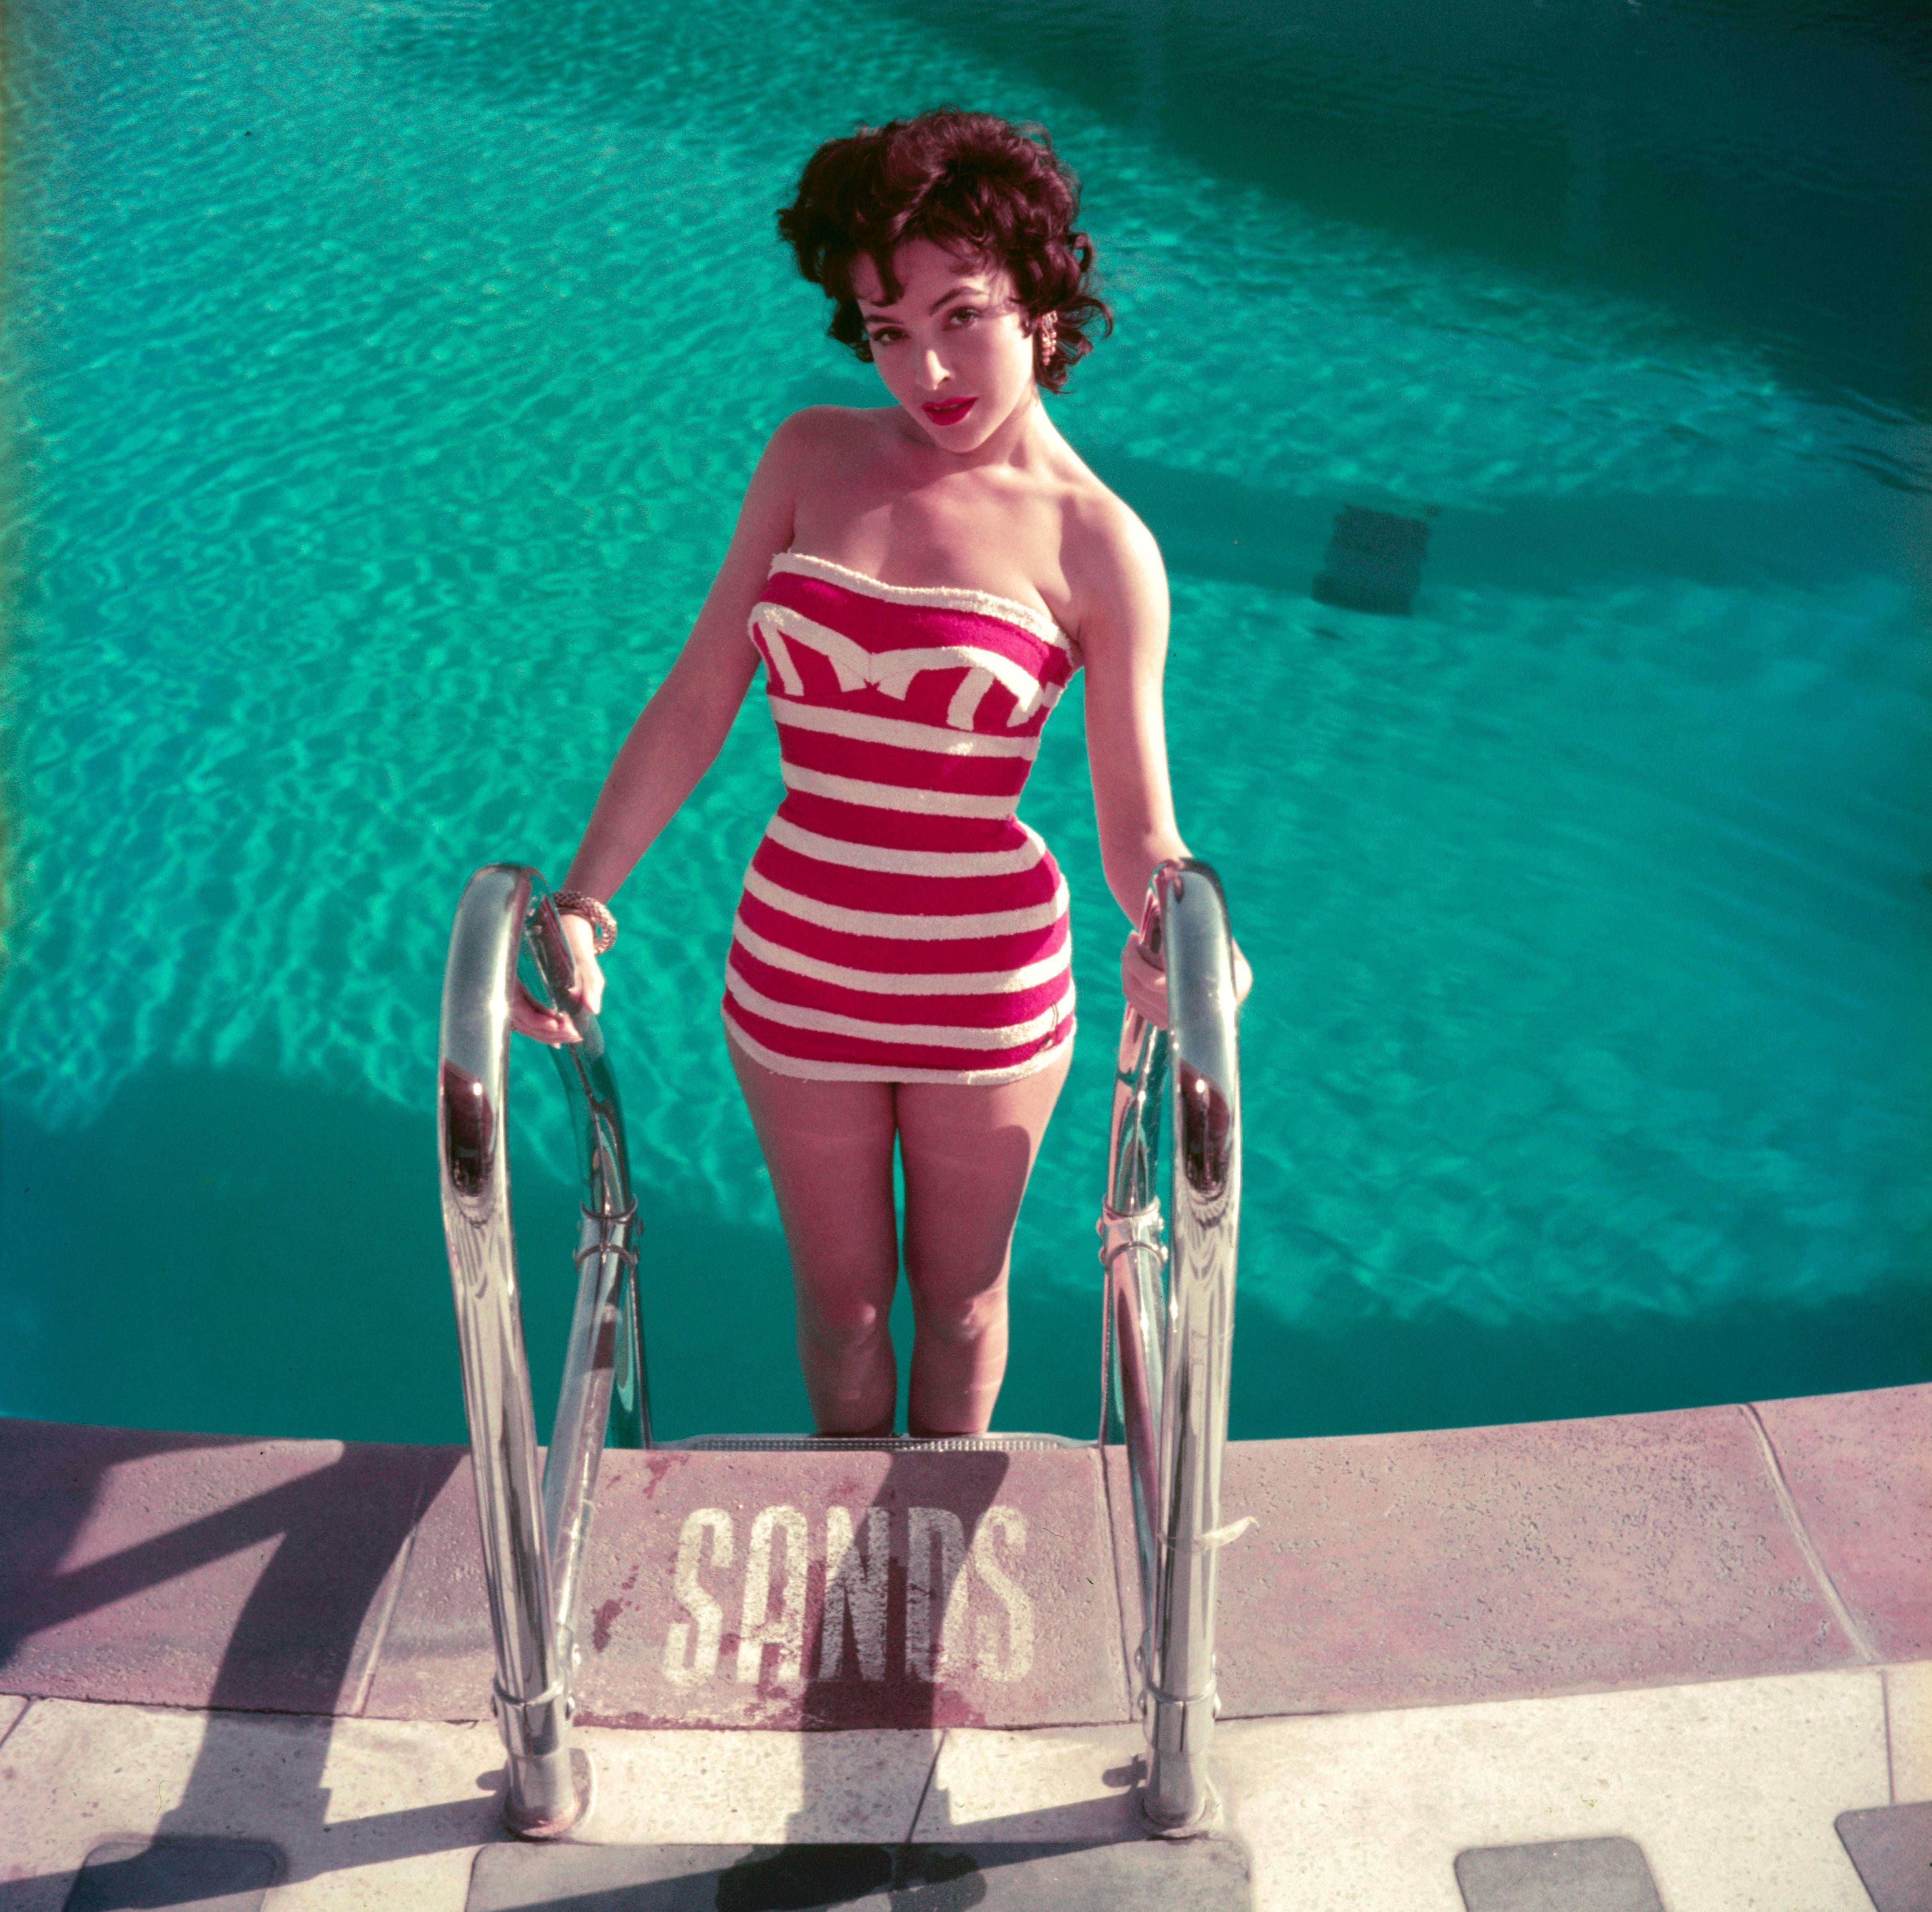 Austrian actress Mara Lane posing by the pool at the Sands Hotel, Las Vegas, in a red and white striped bathing costume, 1954.

Typically 'Slim Poolside' this photograph epitomises the travel style and glamour of the period's wealthy and famous,